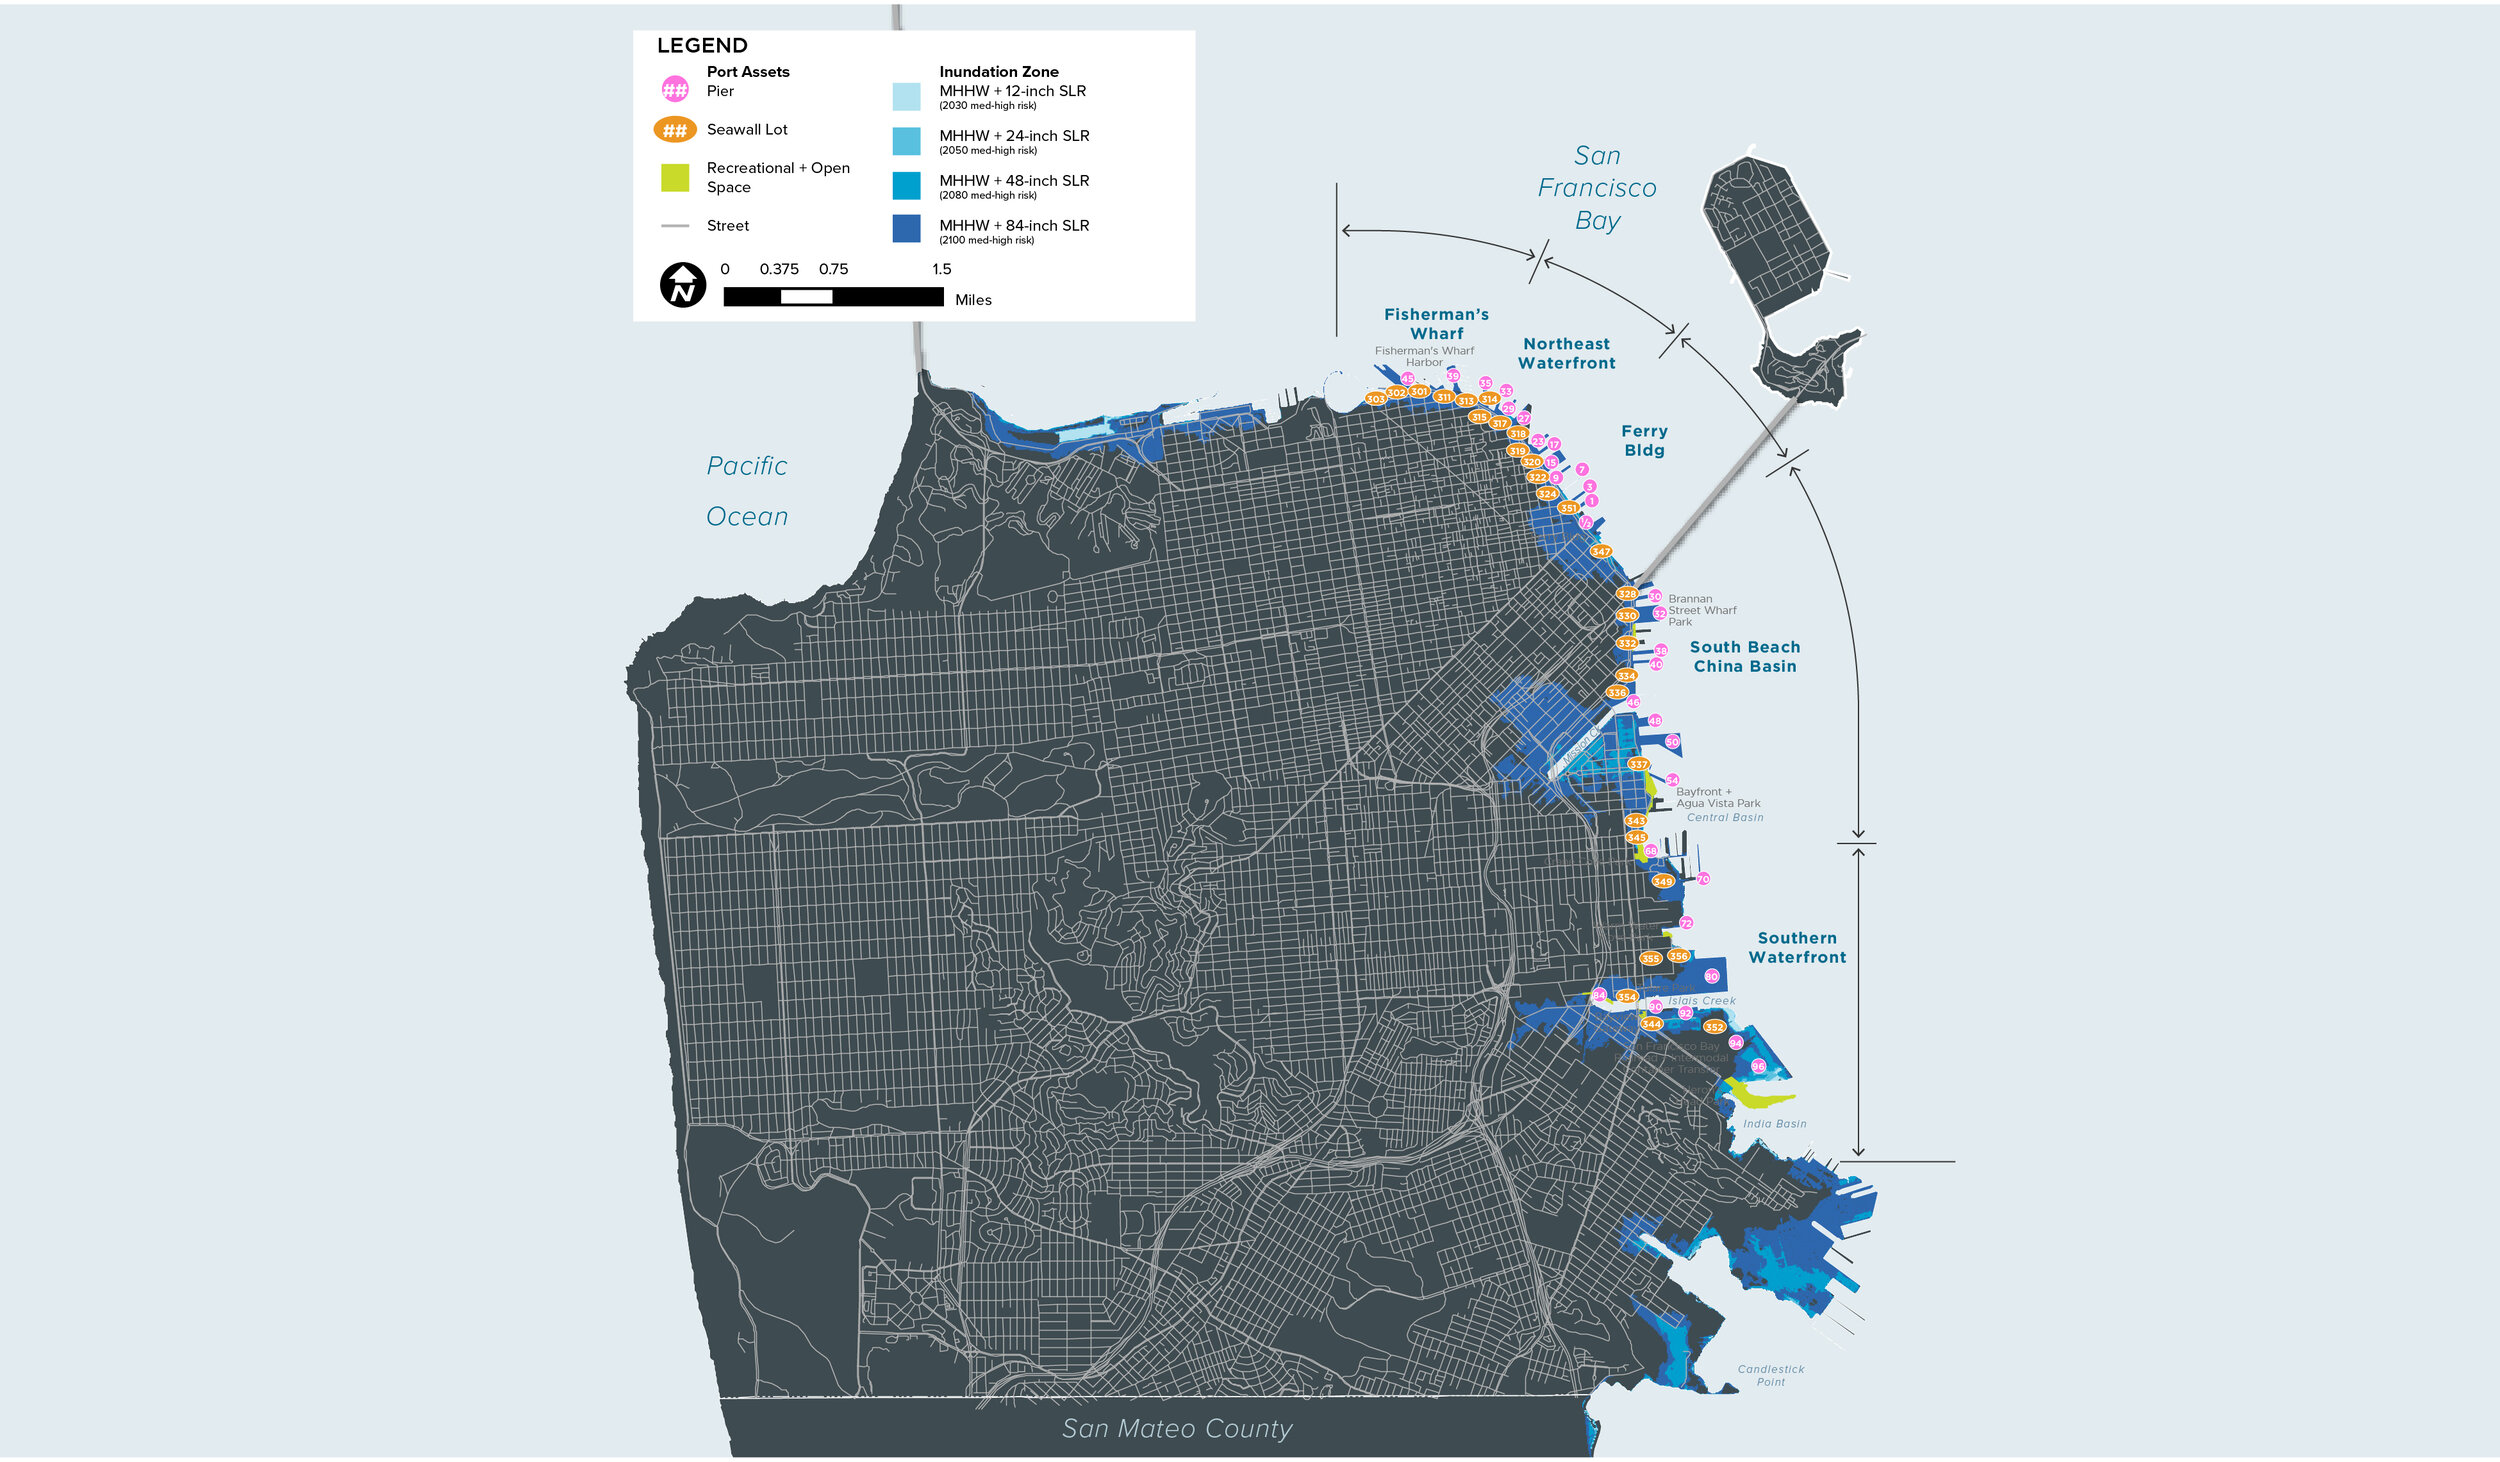 port of sf assets + sea level rise impacted zones